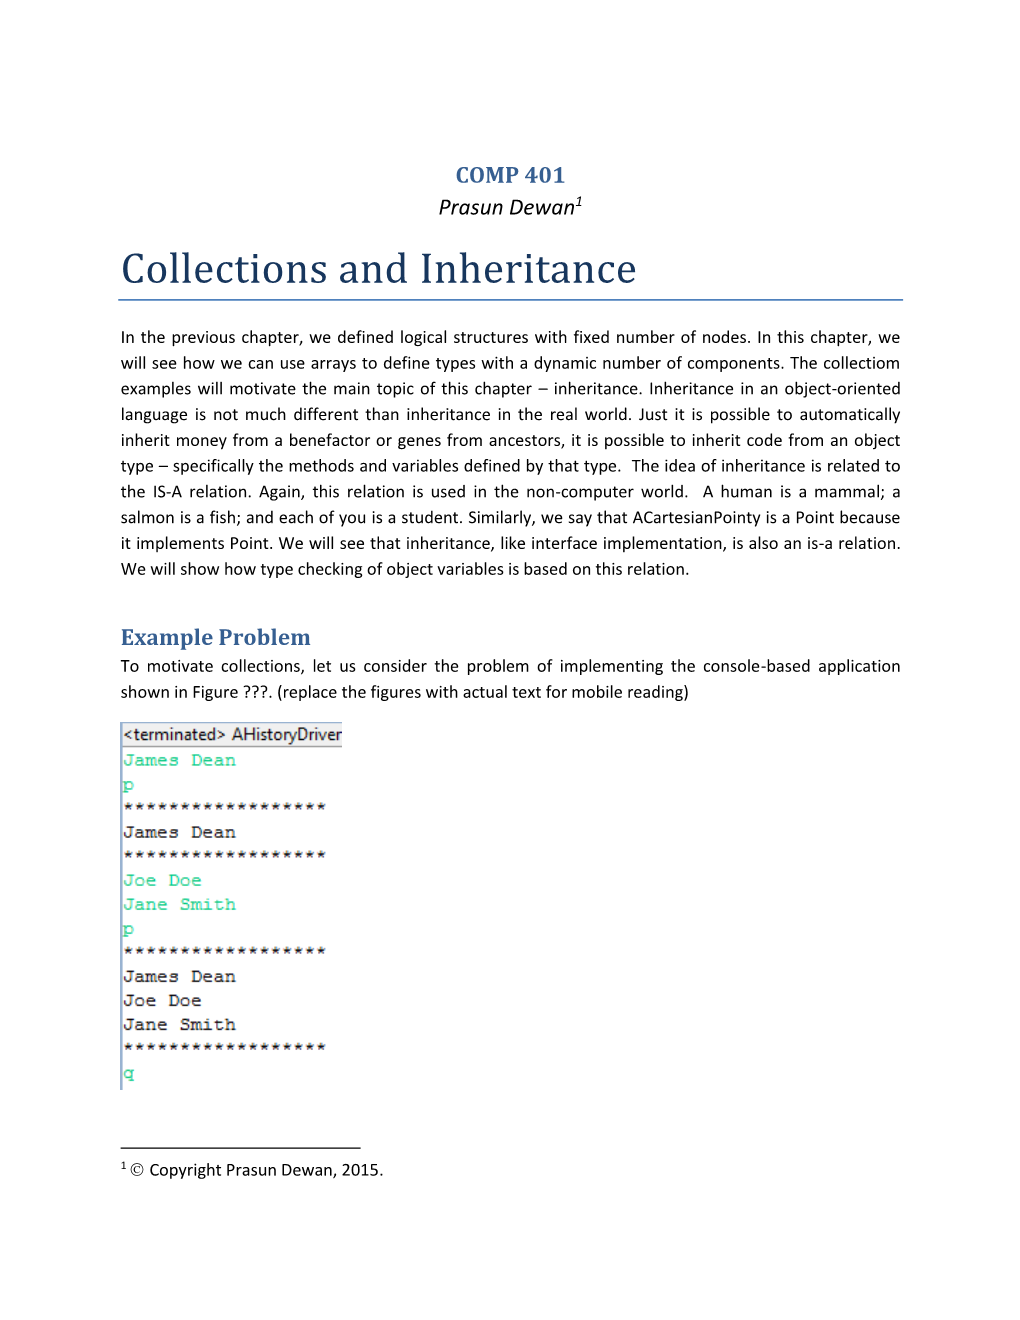 Collections and Inheritance